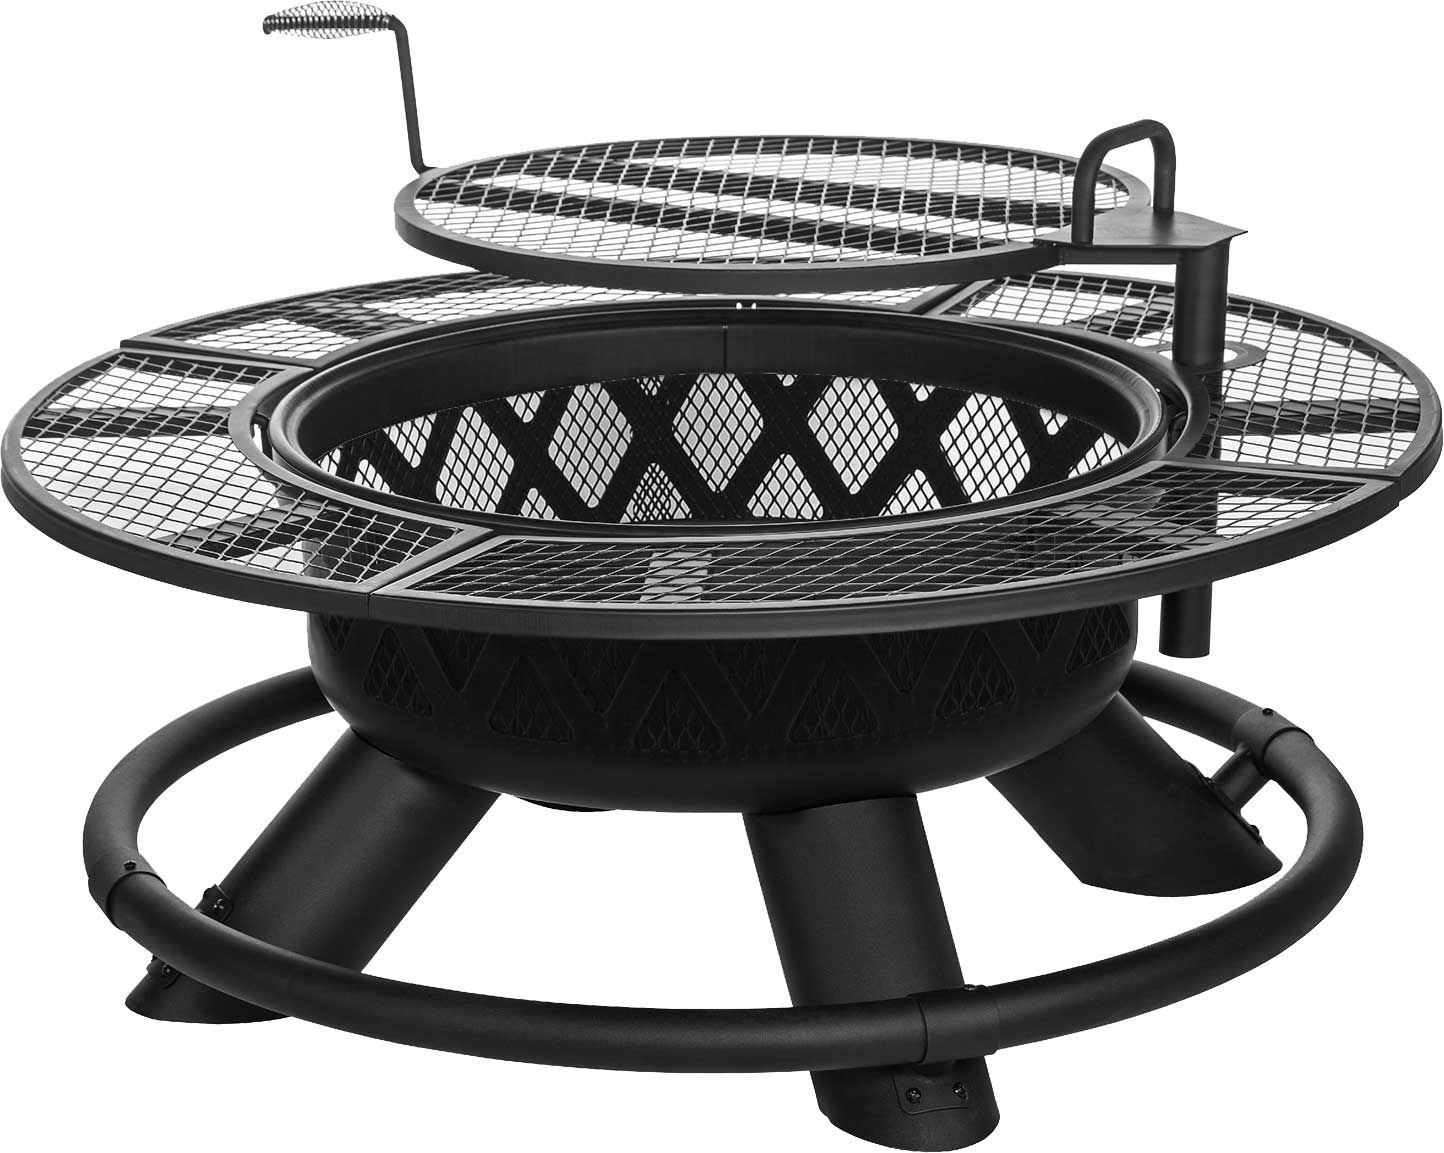 Fire Pits for Sale | Best Price Guarantee at DICK'S